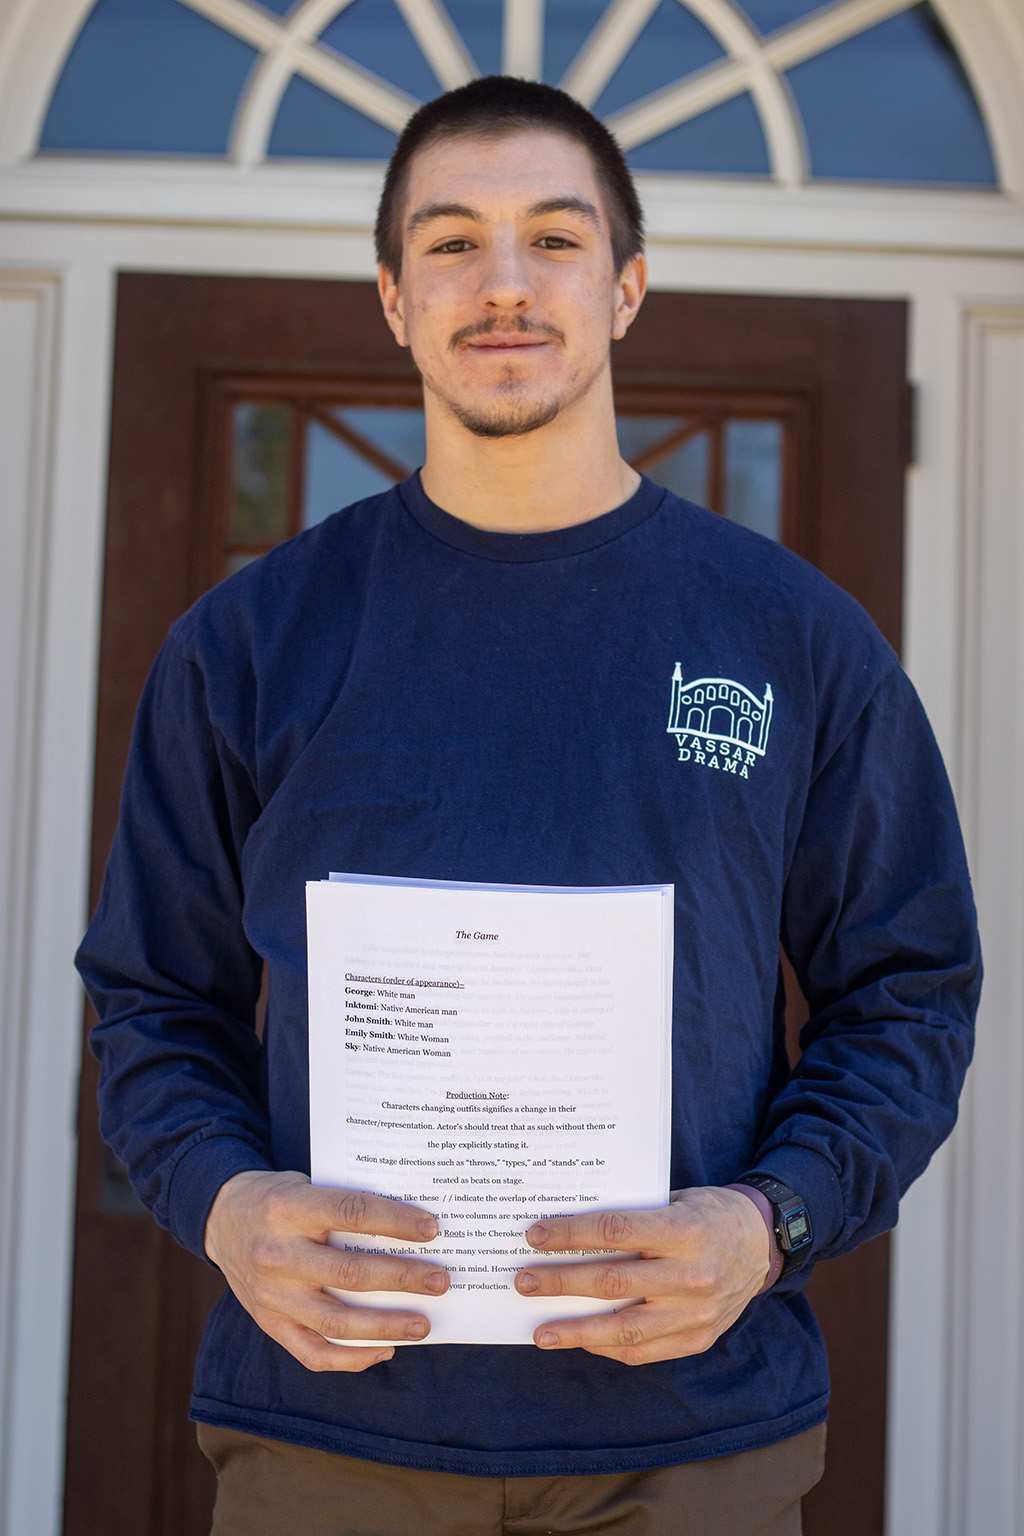 A person with short hair including facial hair, wearing a blue sweatshirt holding a script.